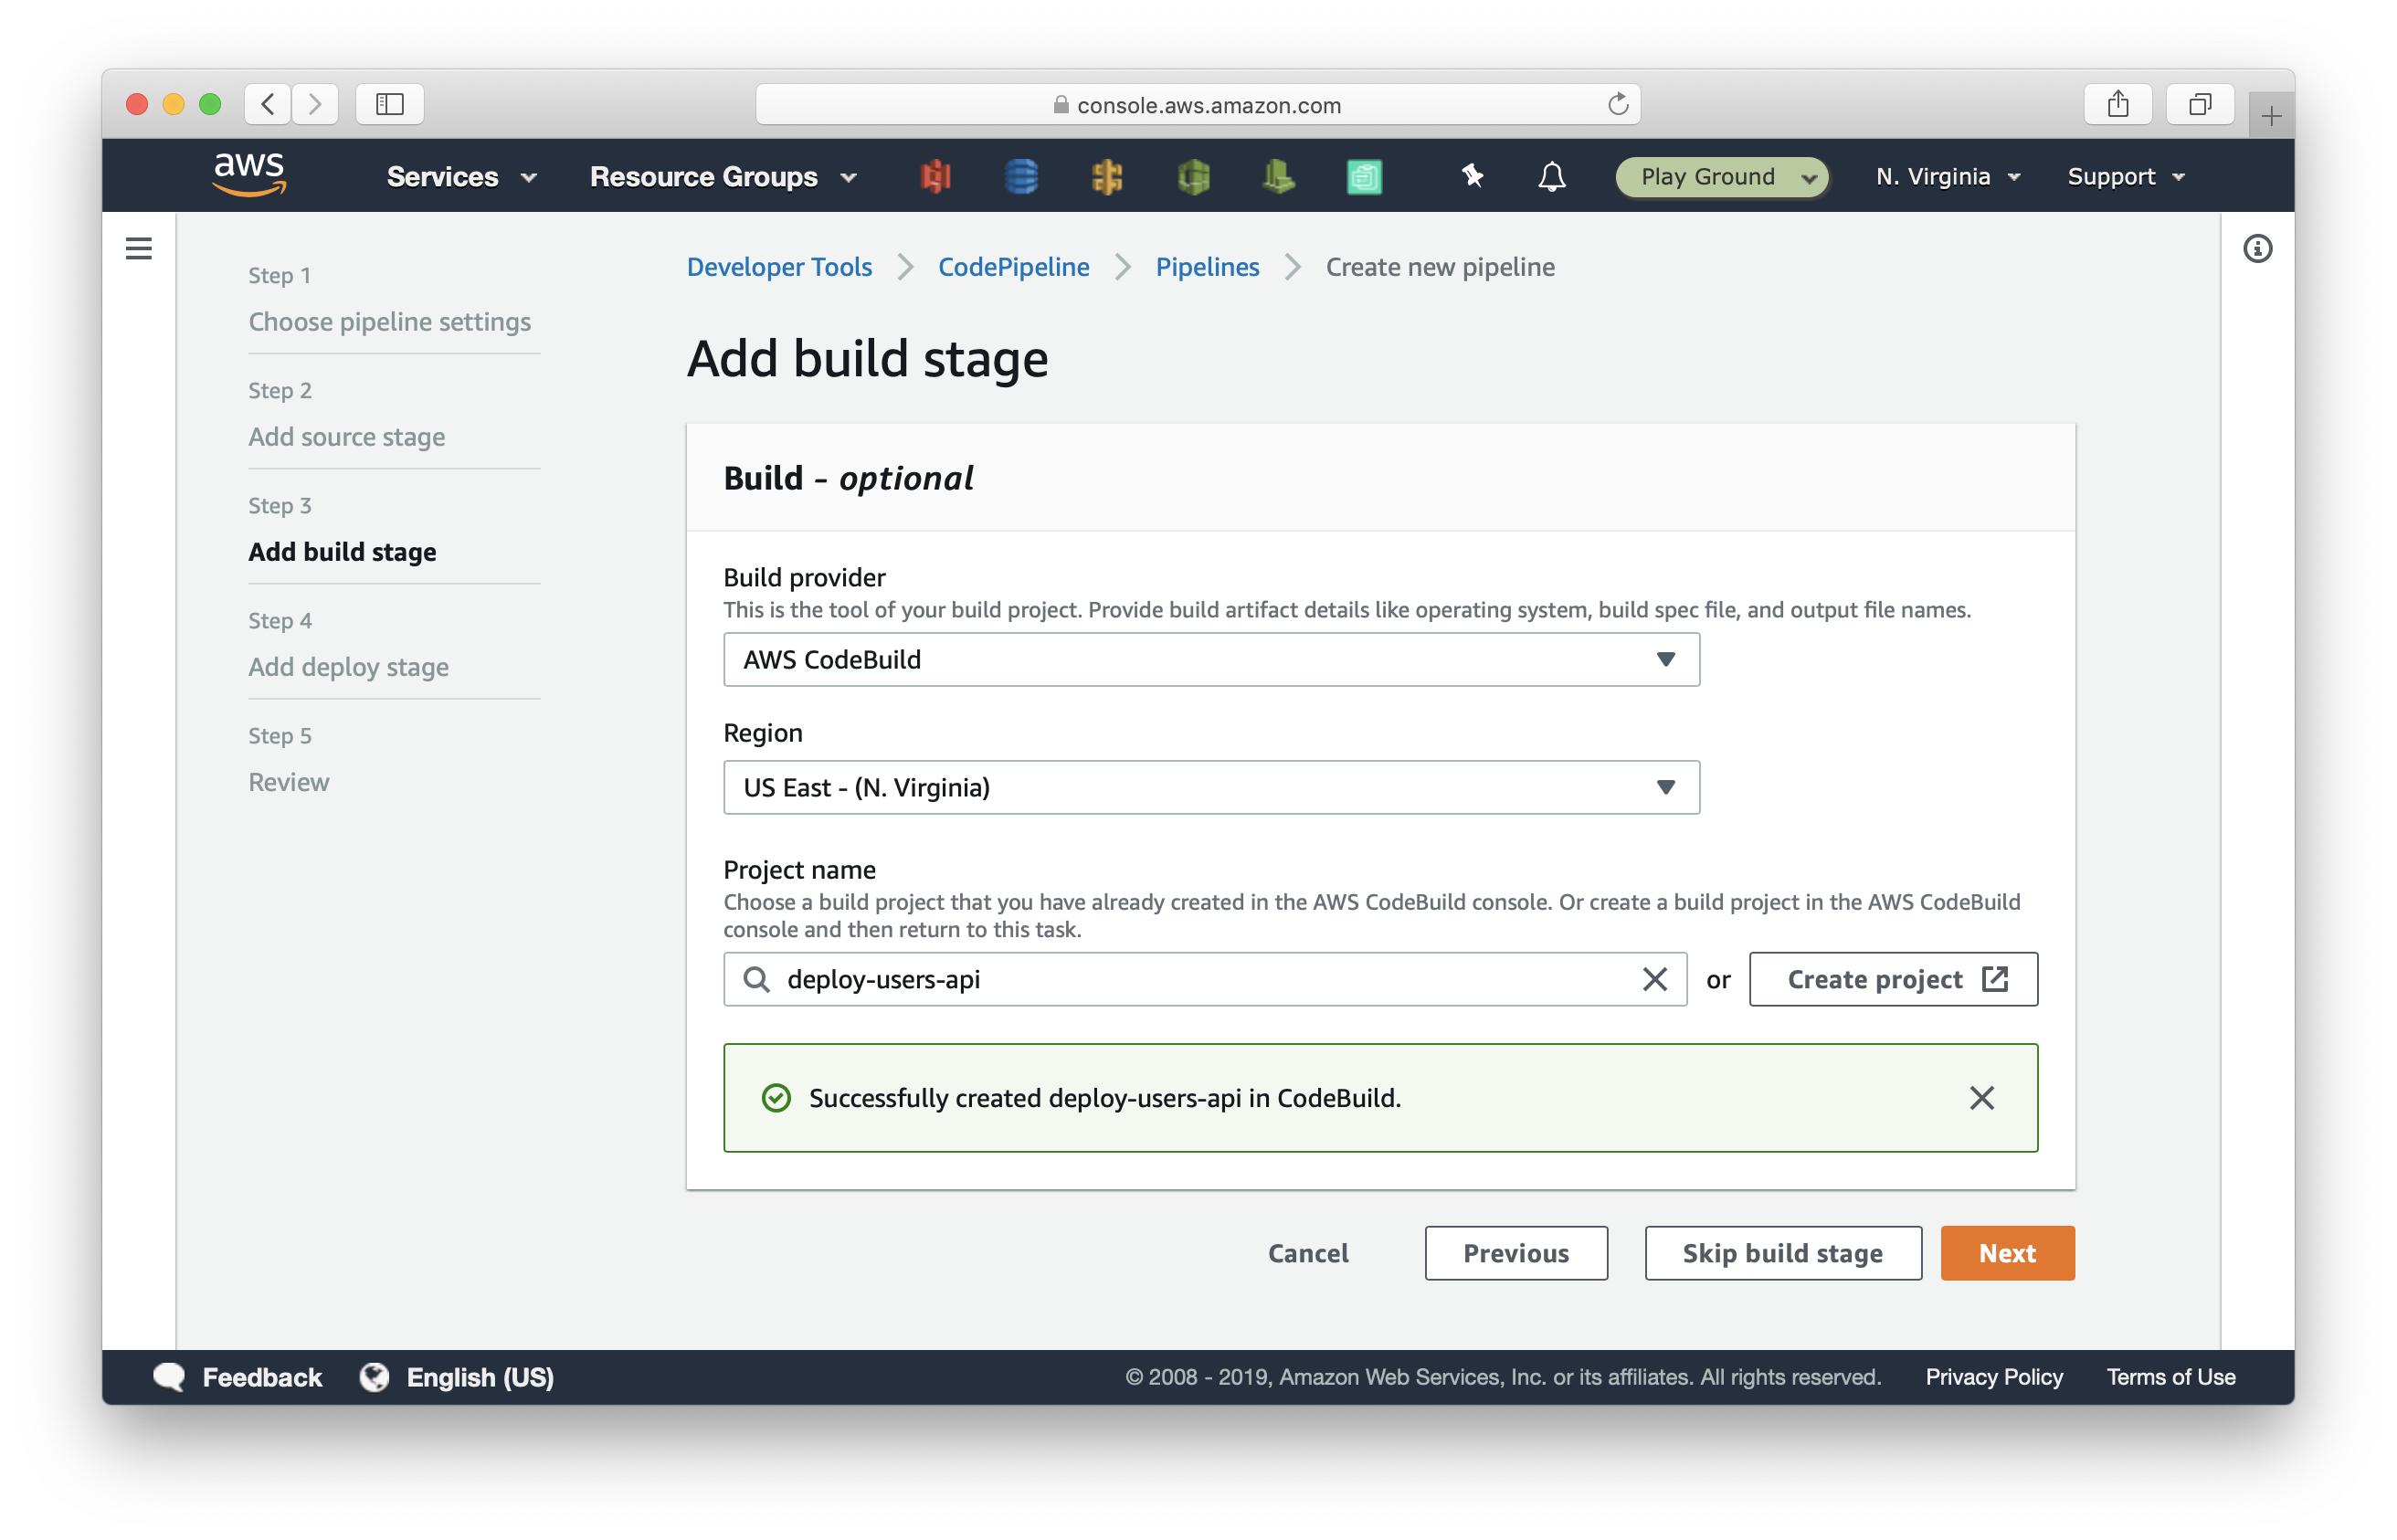 Add build stage in CodePipeline